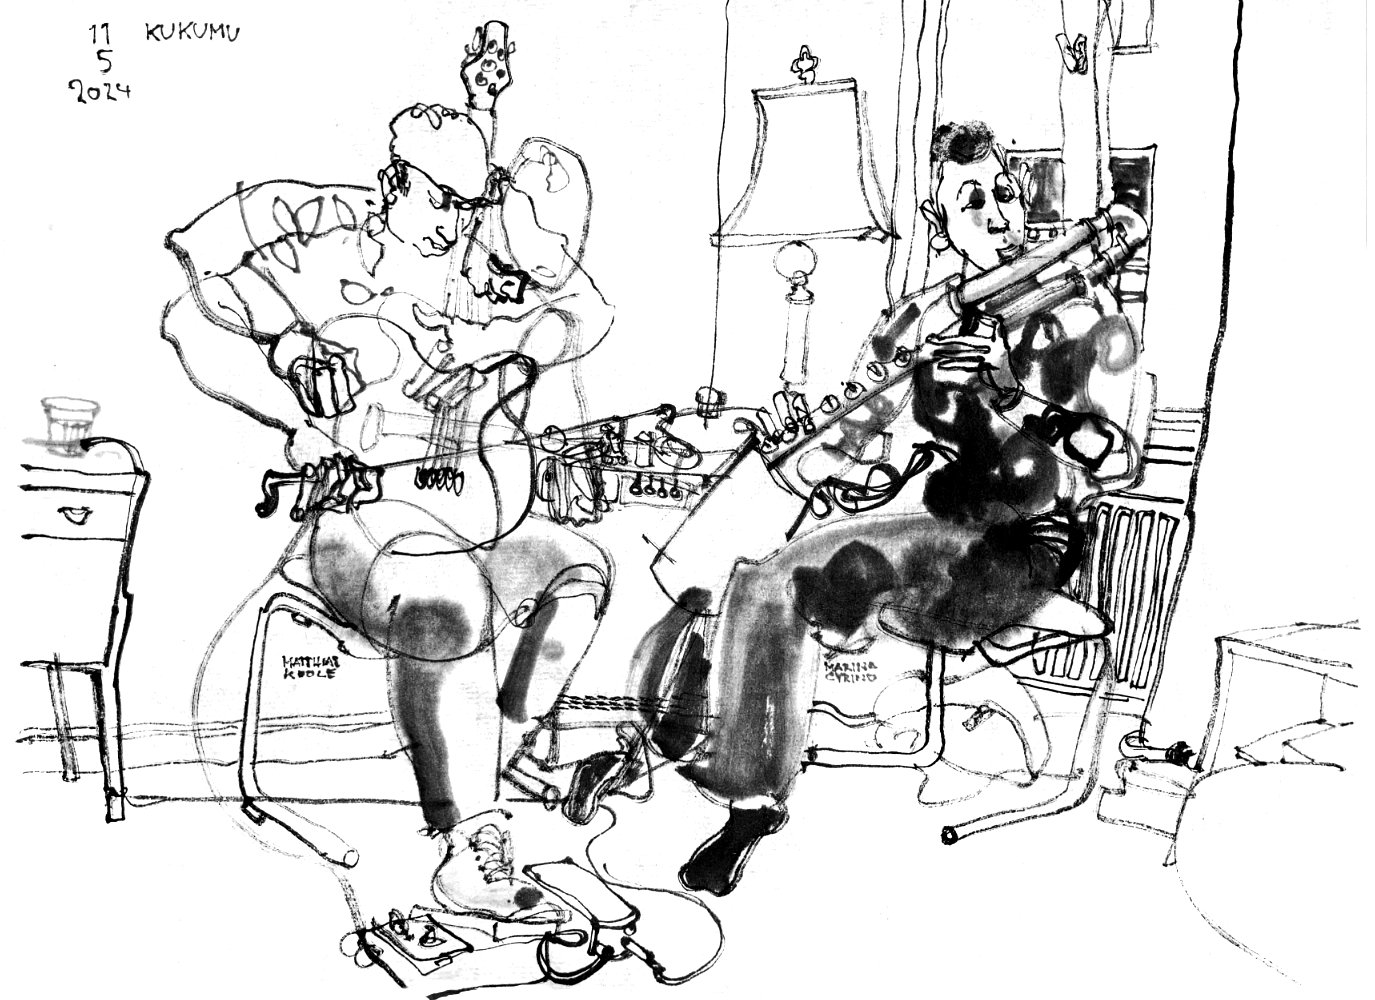 Ink drawing of a man, playing the guitar (depicted twice, bowing and picking) and a woman, playing a flute.